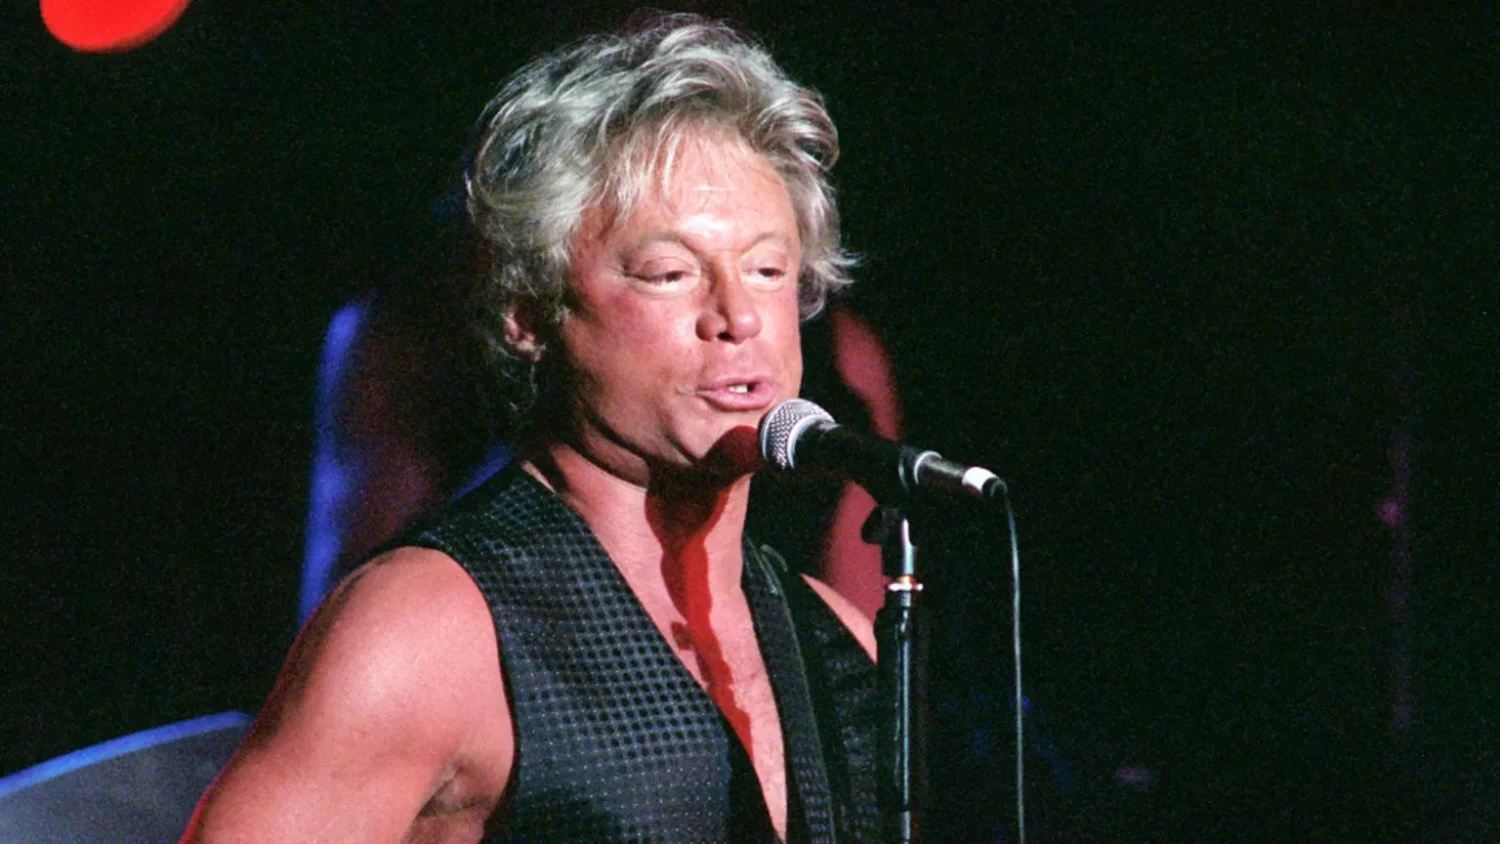 Getty Images / Eric Carmen performing in 2005